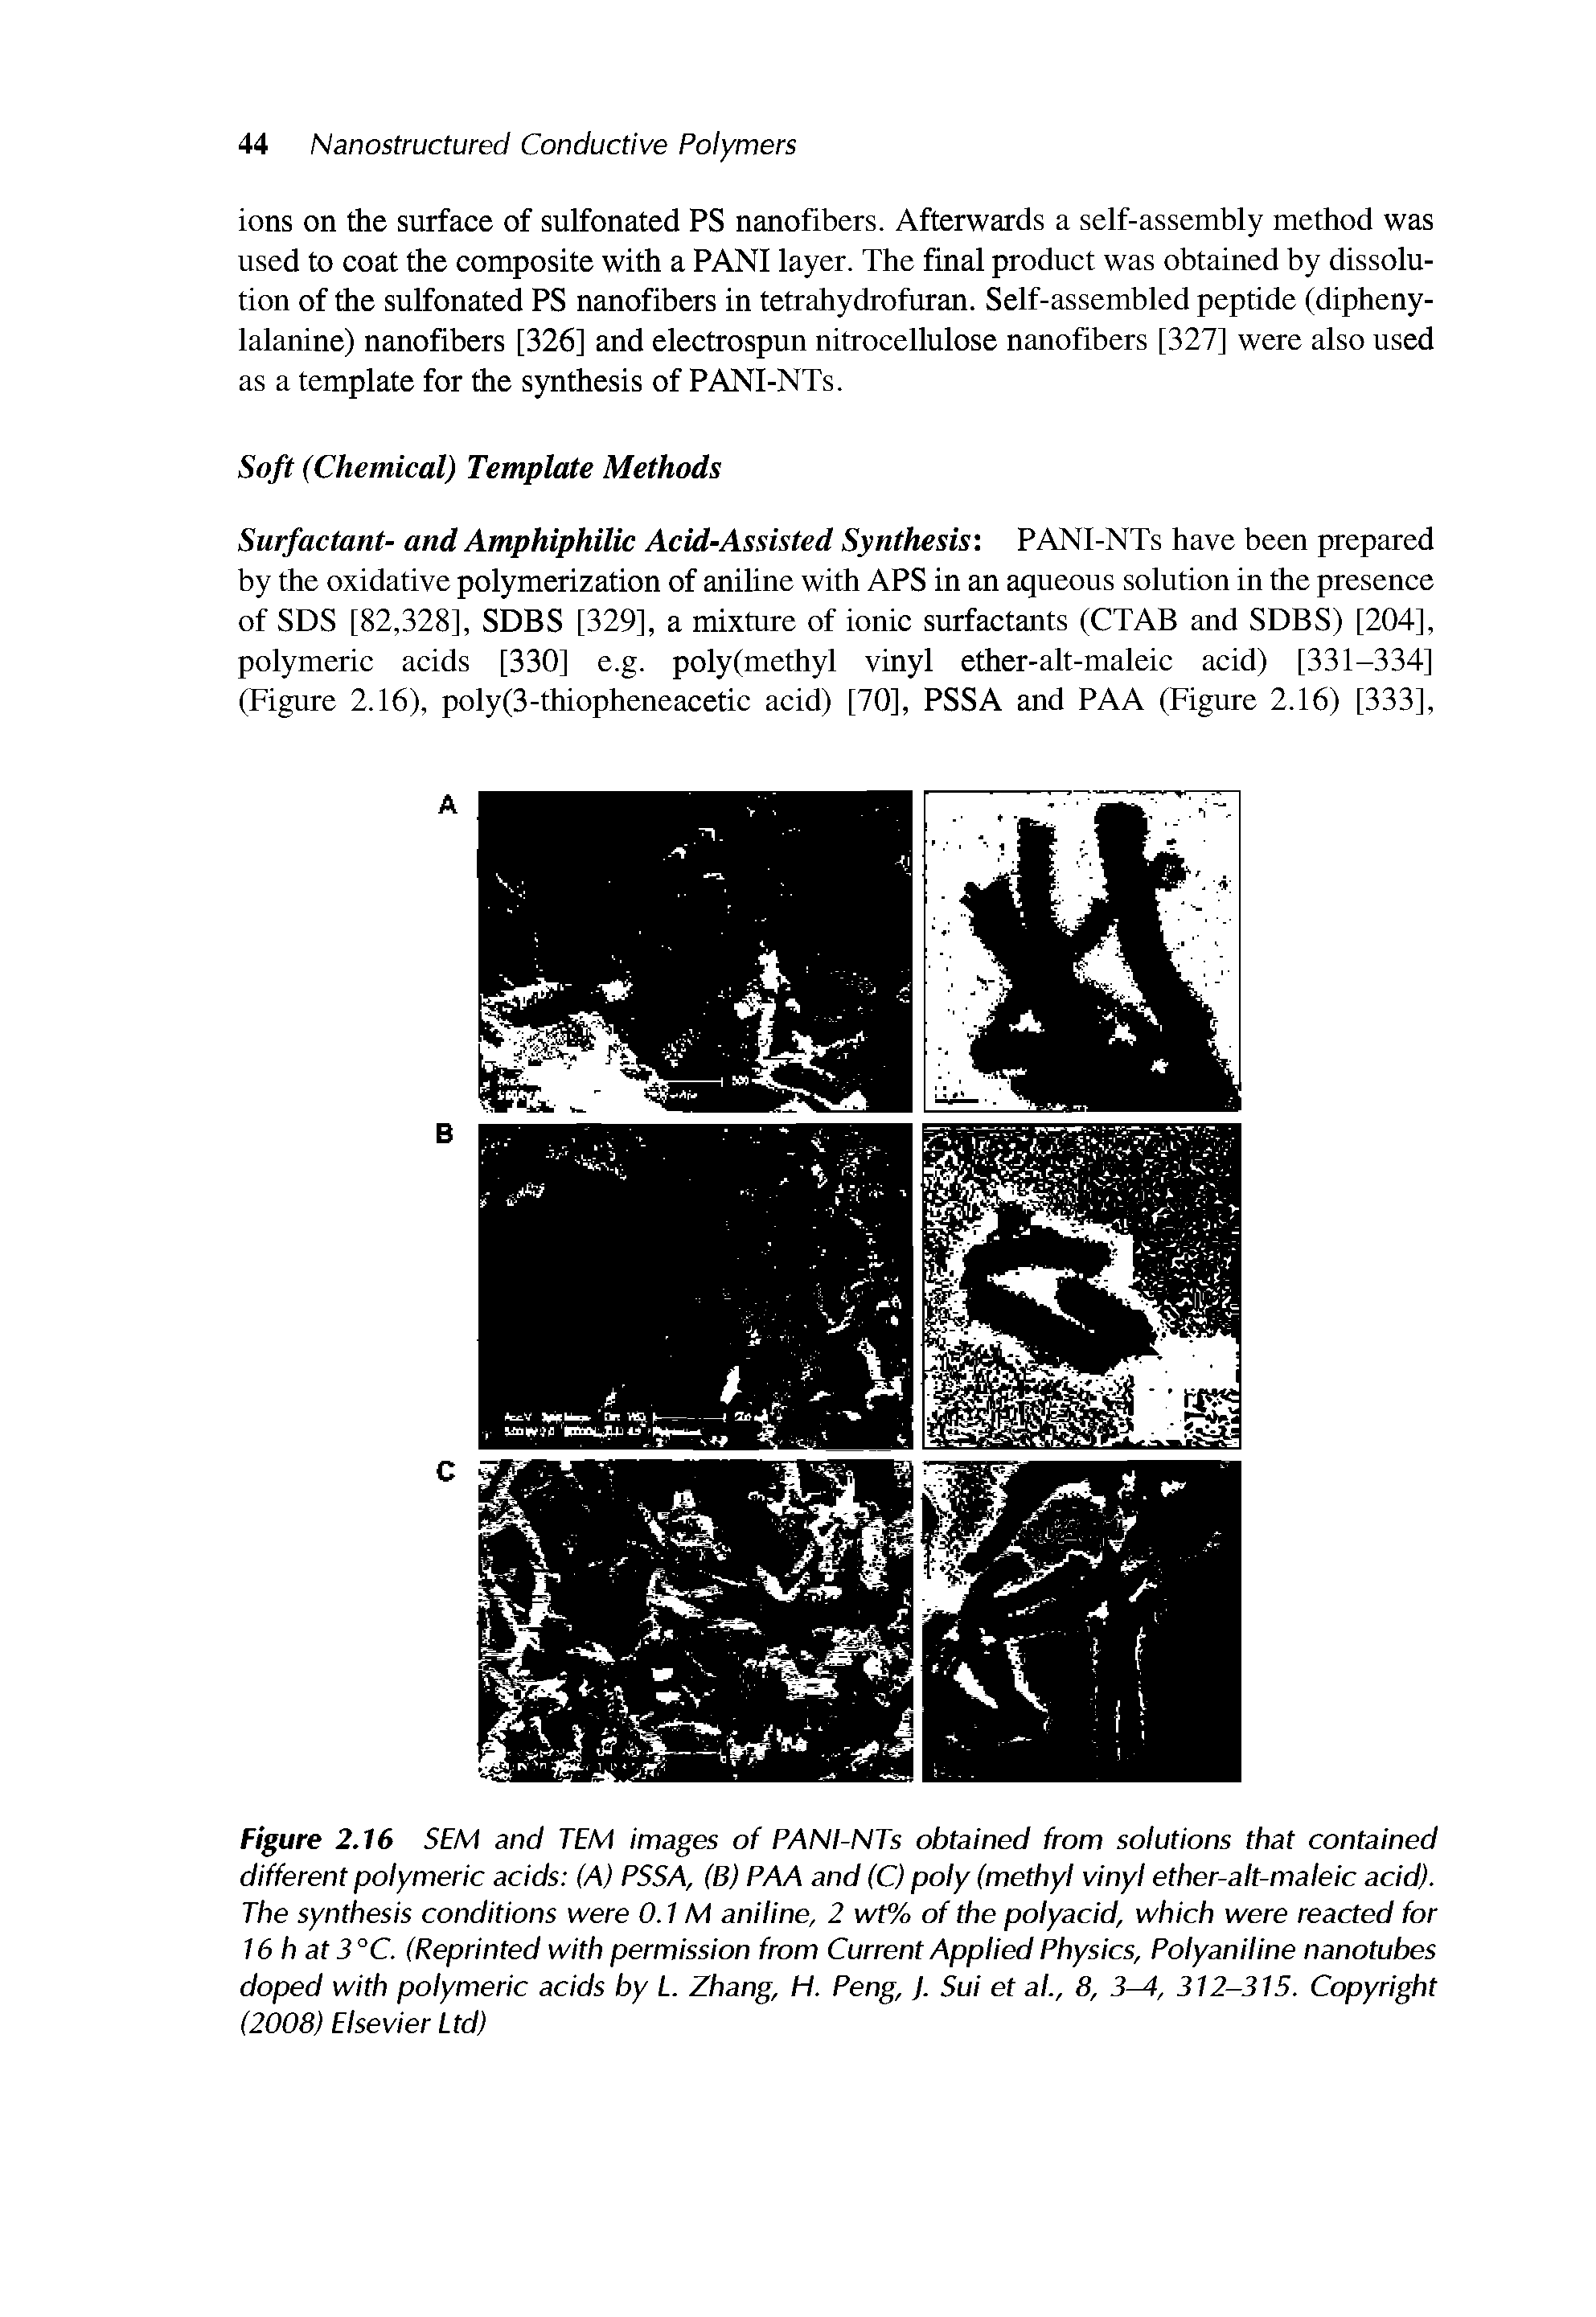 Figure 2.16 SEM and TEM images of PANI-NTs obtained from solutions that contained different polymeric acids (A) PSSA, (B) PAA and (C) poly (methyl vinyl ether-alt-maleic acid). The synthesis conditions were 0.1 M aniline, 2 wt% of the polyacid, which were reacted for 16 h at 3°C. (Reprinted with permission from Current Applied Physics, Polyaniline nanotubes doped with polymeric acids by L. Zhang, H. Peng, J. Sui et al., 8, 3, 312-315. Copyright (2008) Elsevier Ltd)...